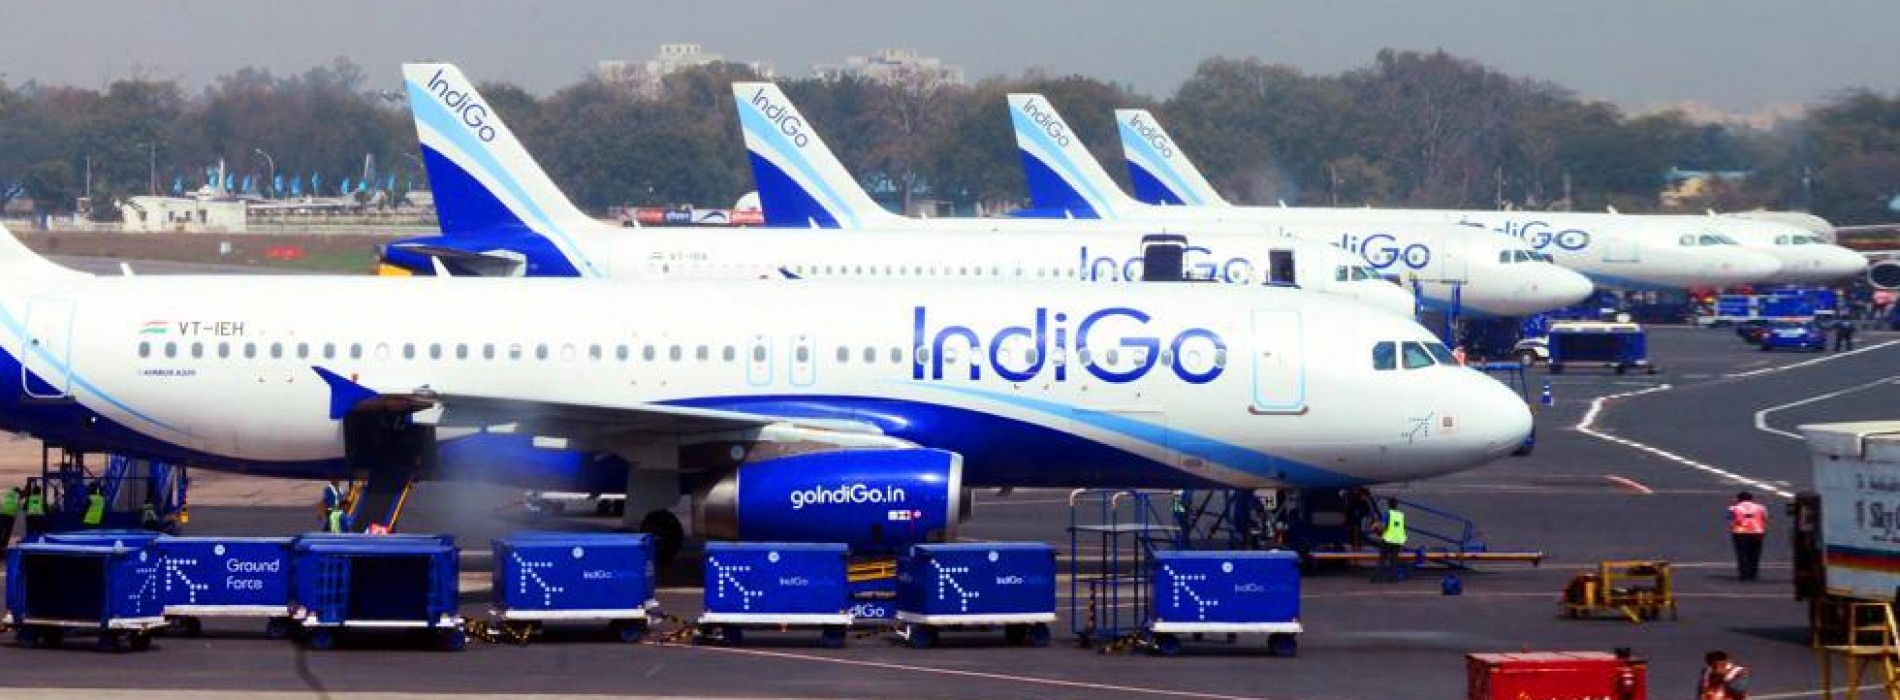 Indian Airlines to Induct 900 Aircraft in Coming Years, Indigo to Add 448 Planes